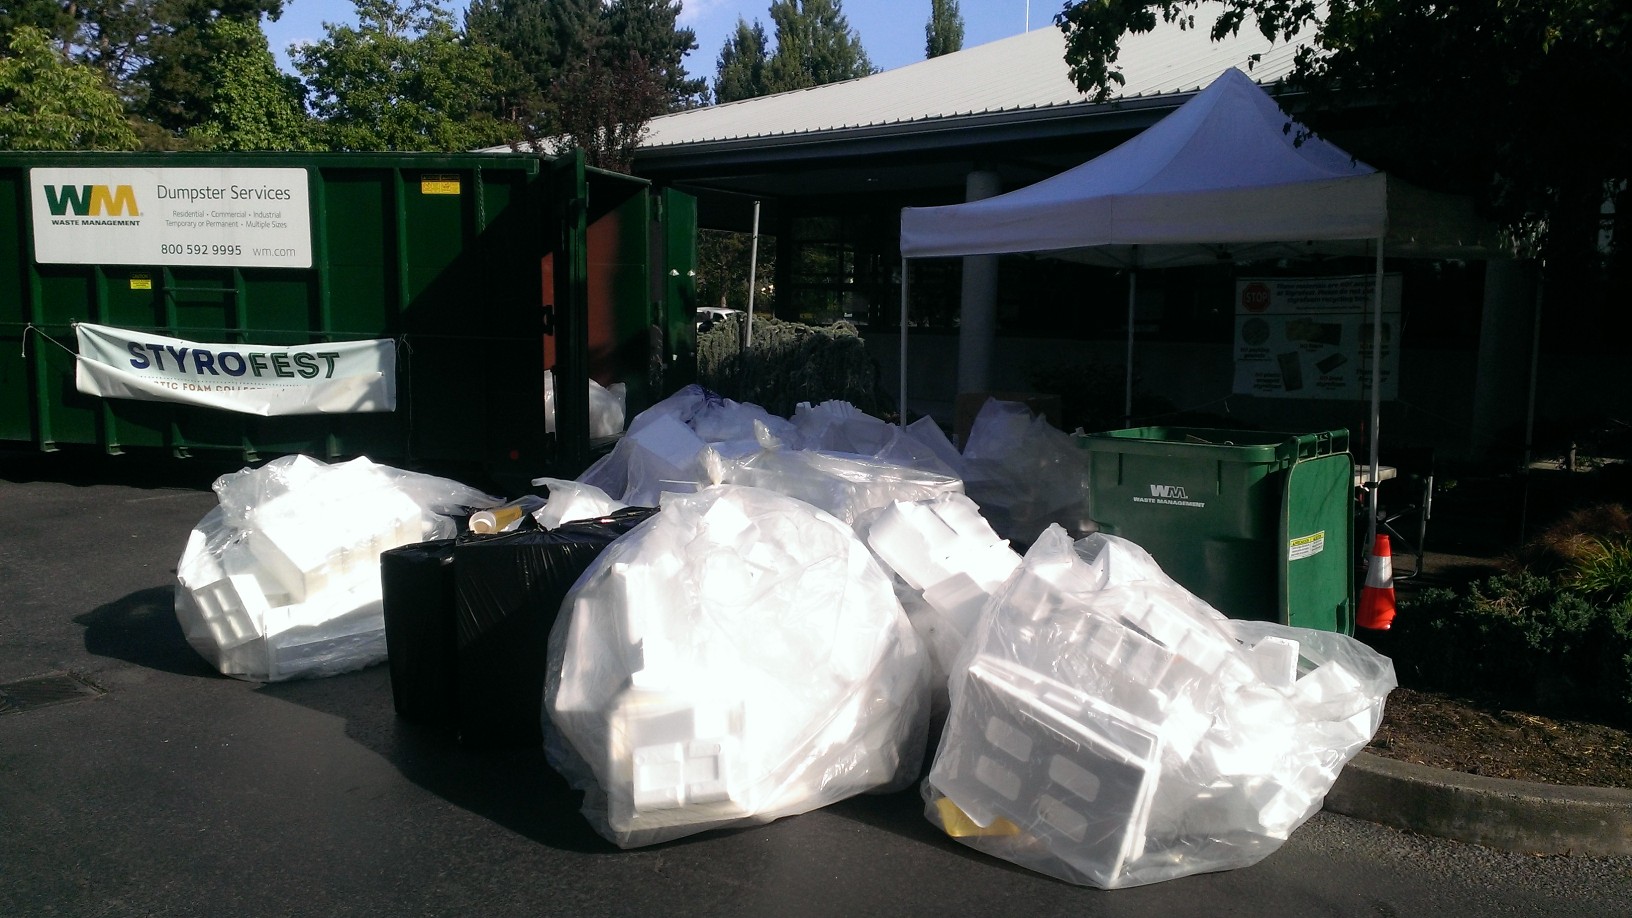 Bagged styrofoam for recycling collected in June 2015